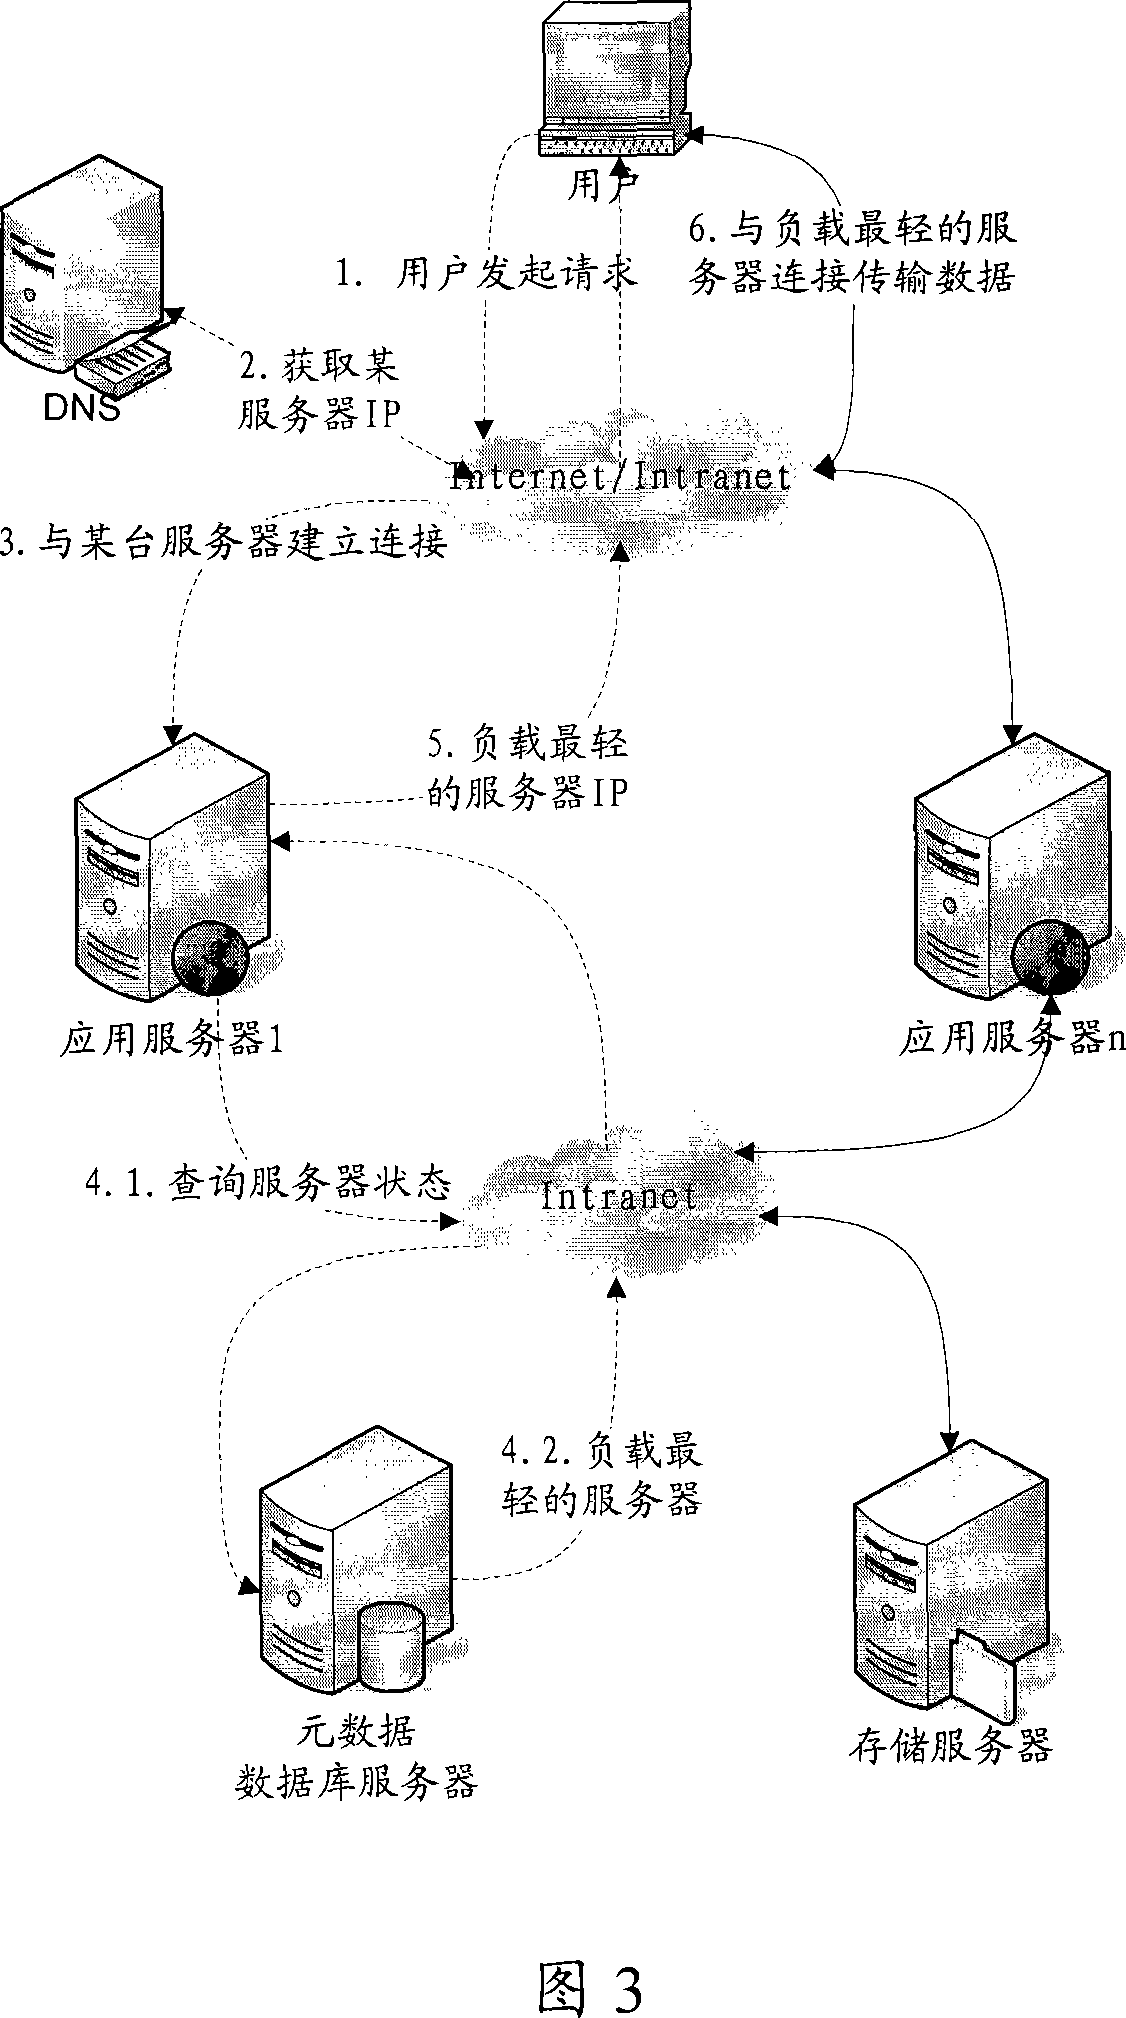 Method and system for implementing application server load balancing